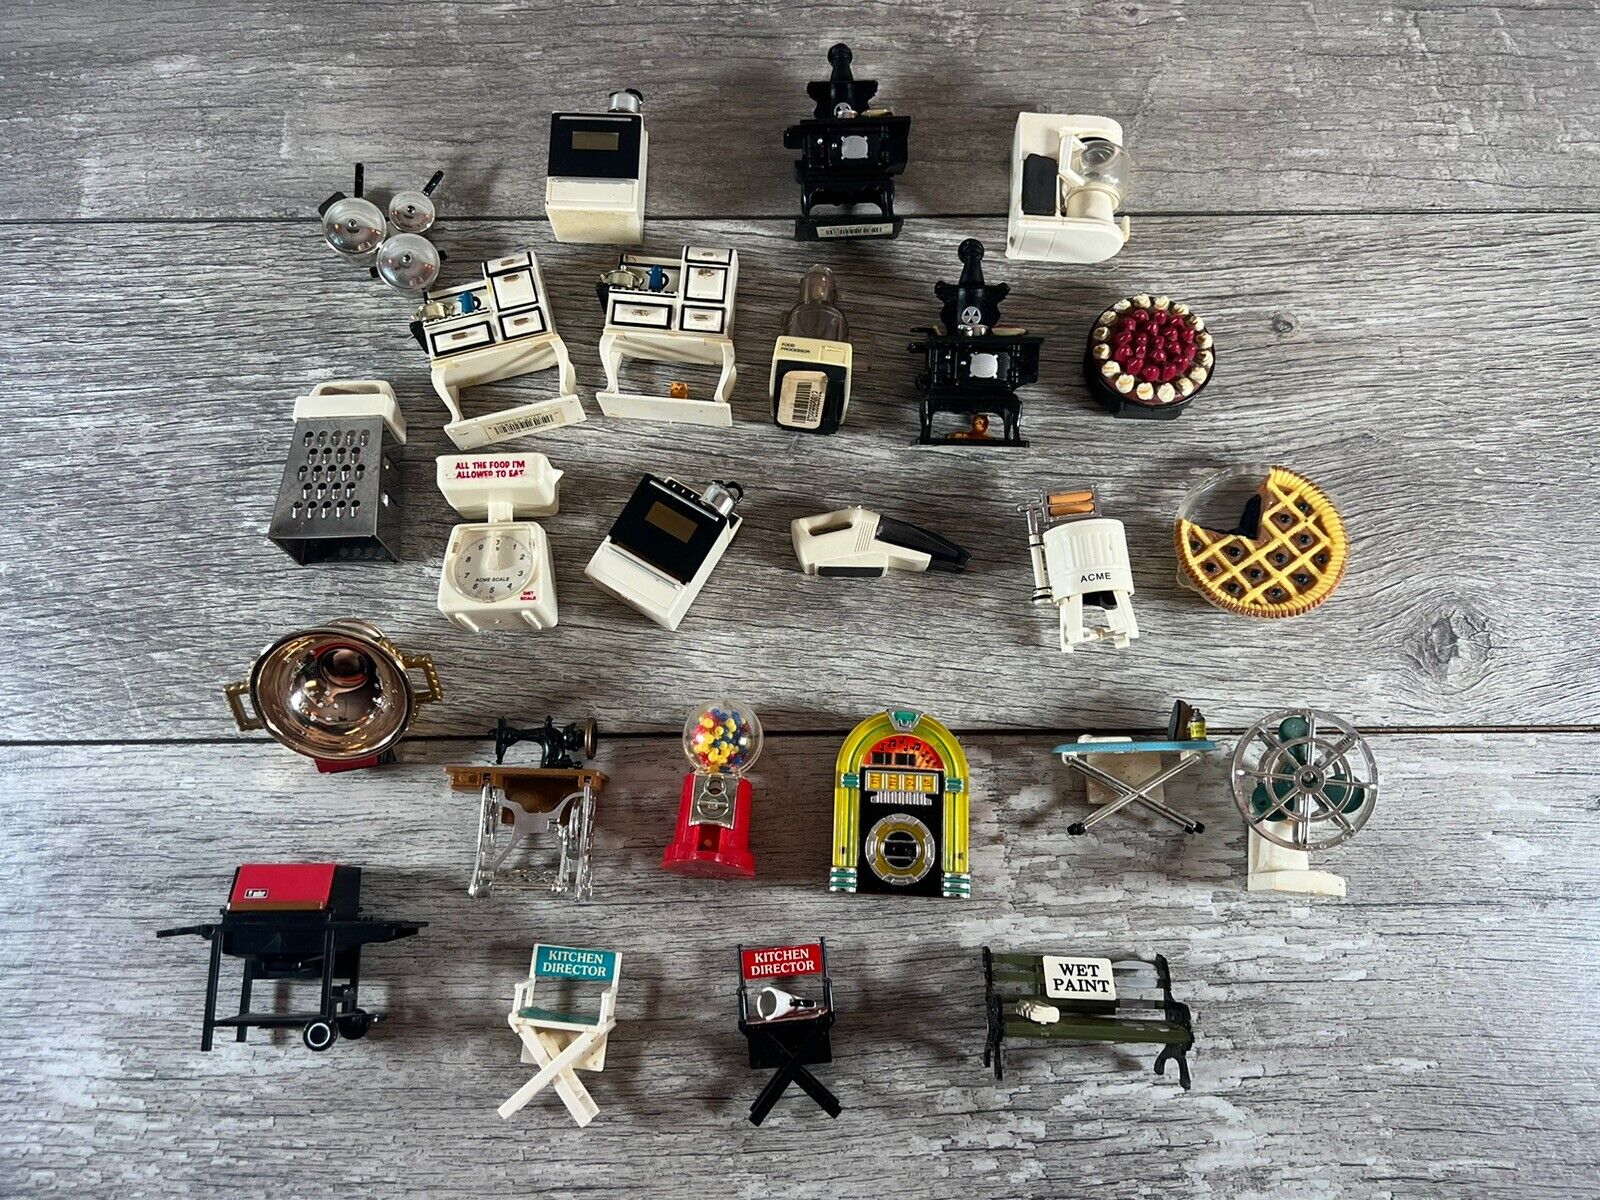 Lot Of 25 Vintage Acme Refrigerator Magnets  Miniature Kitchen Home Mixed Genre